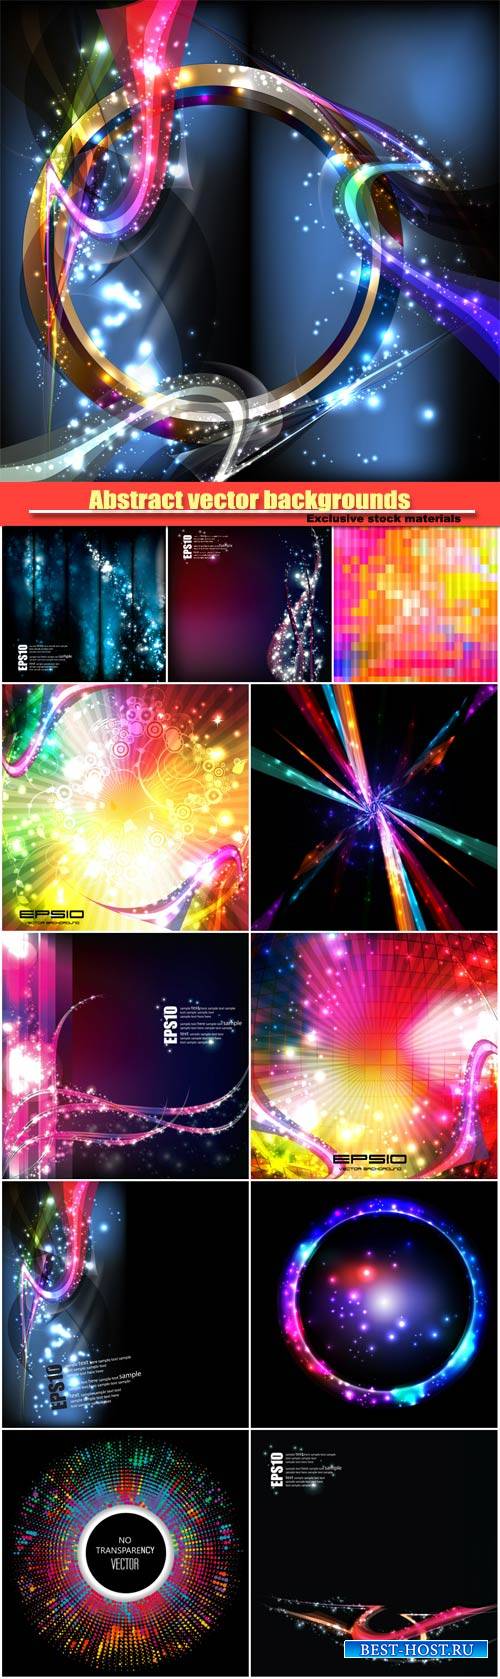 Abstract vector backgrounds with glow effect